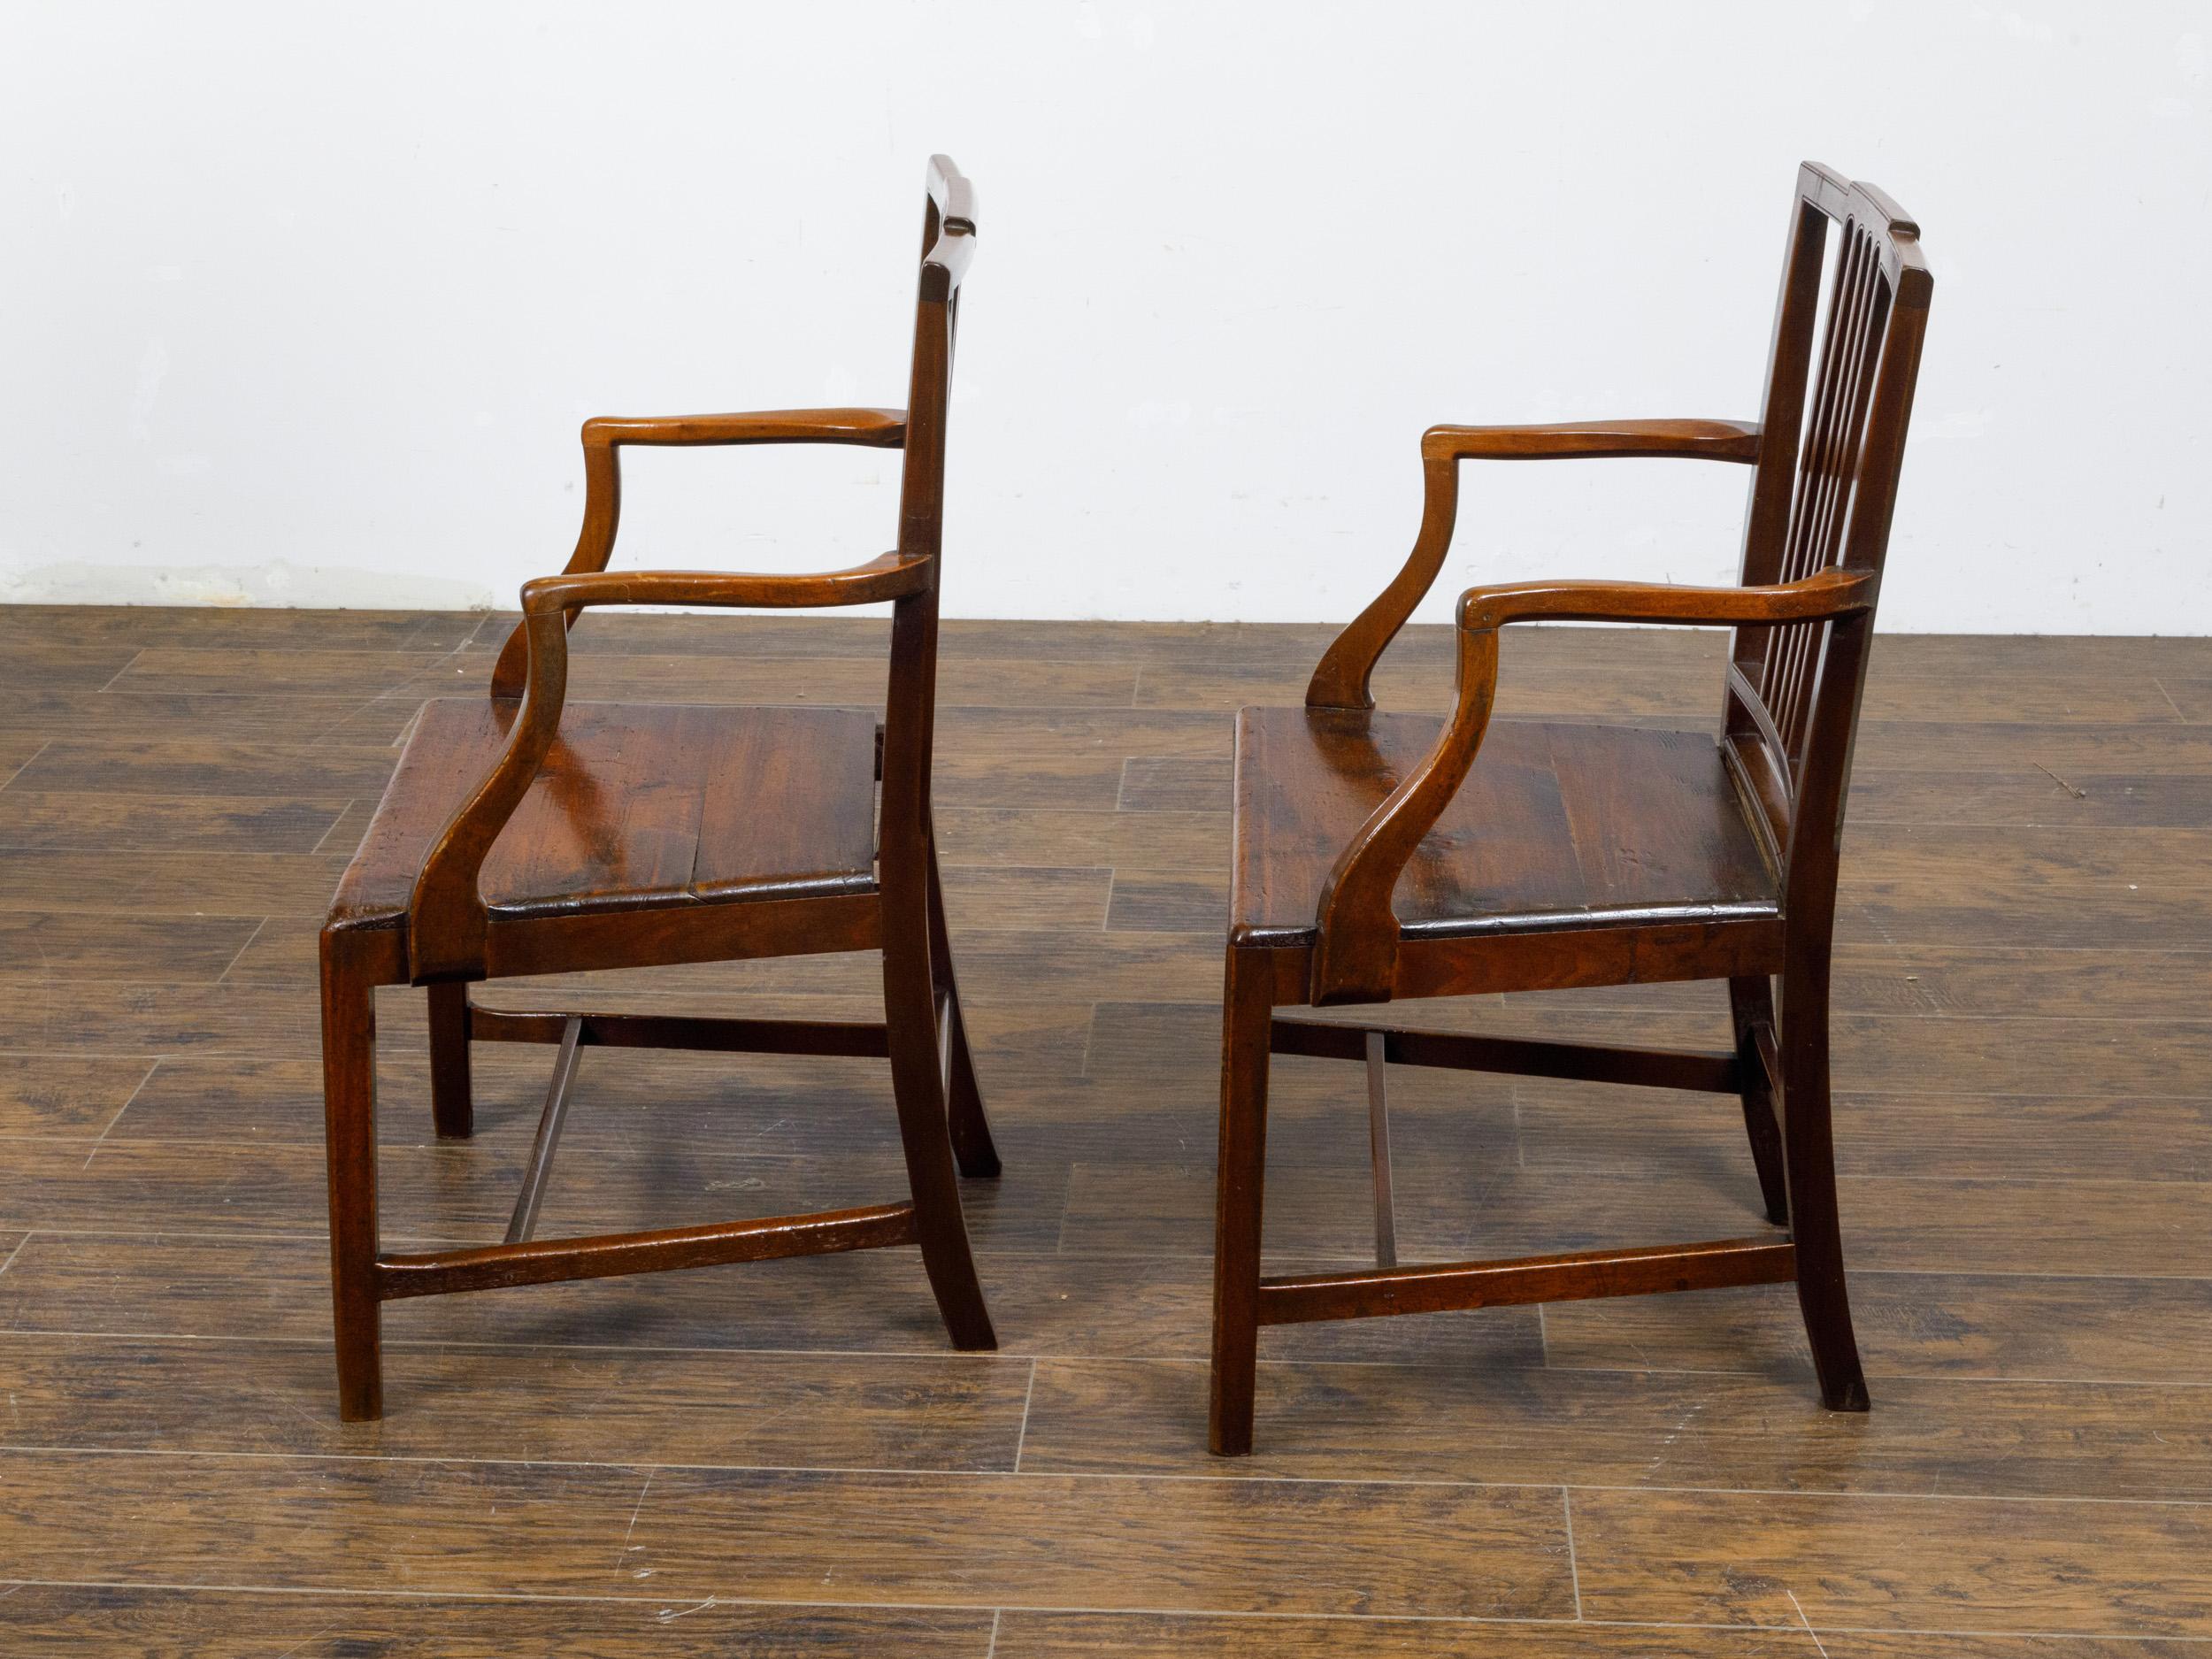 Pair of English Early 19th Century Plank Seat Chairs with Scrolling Arms In Good Condition For Sale In Atlanta, GA